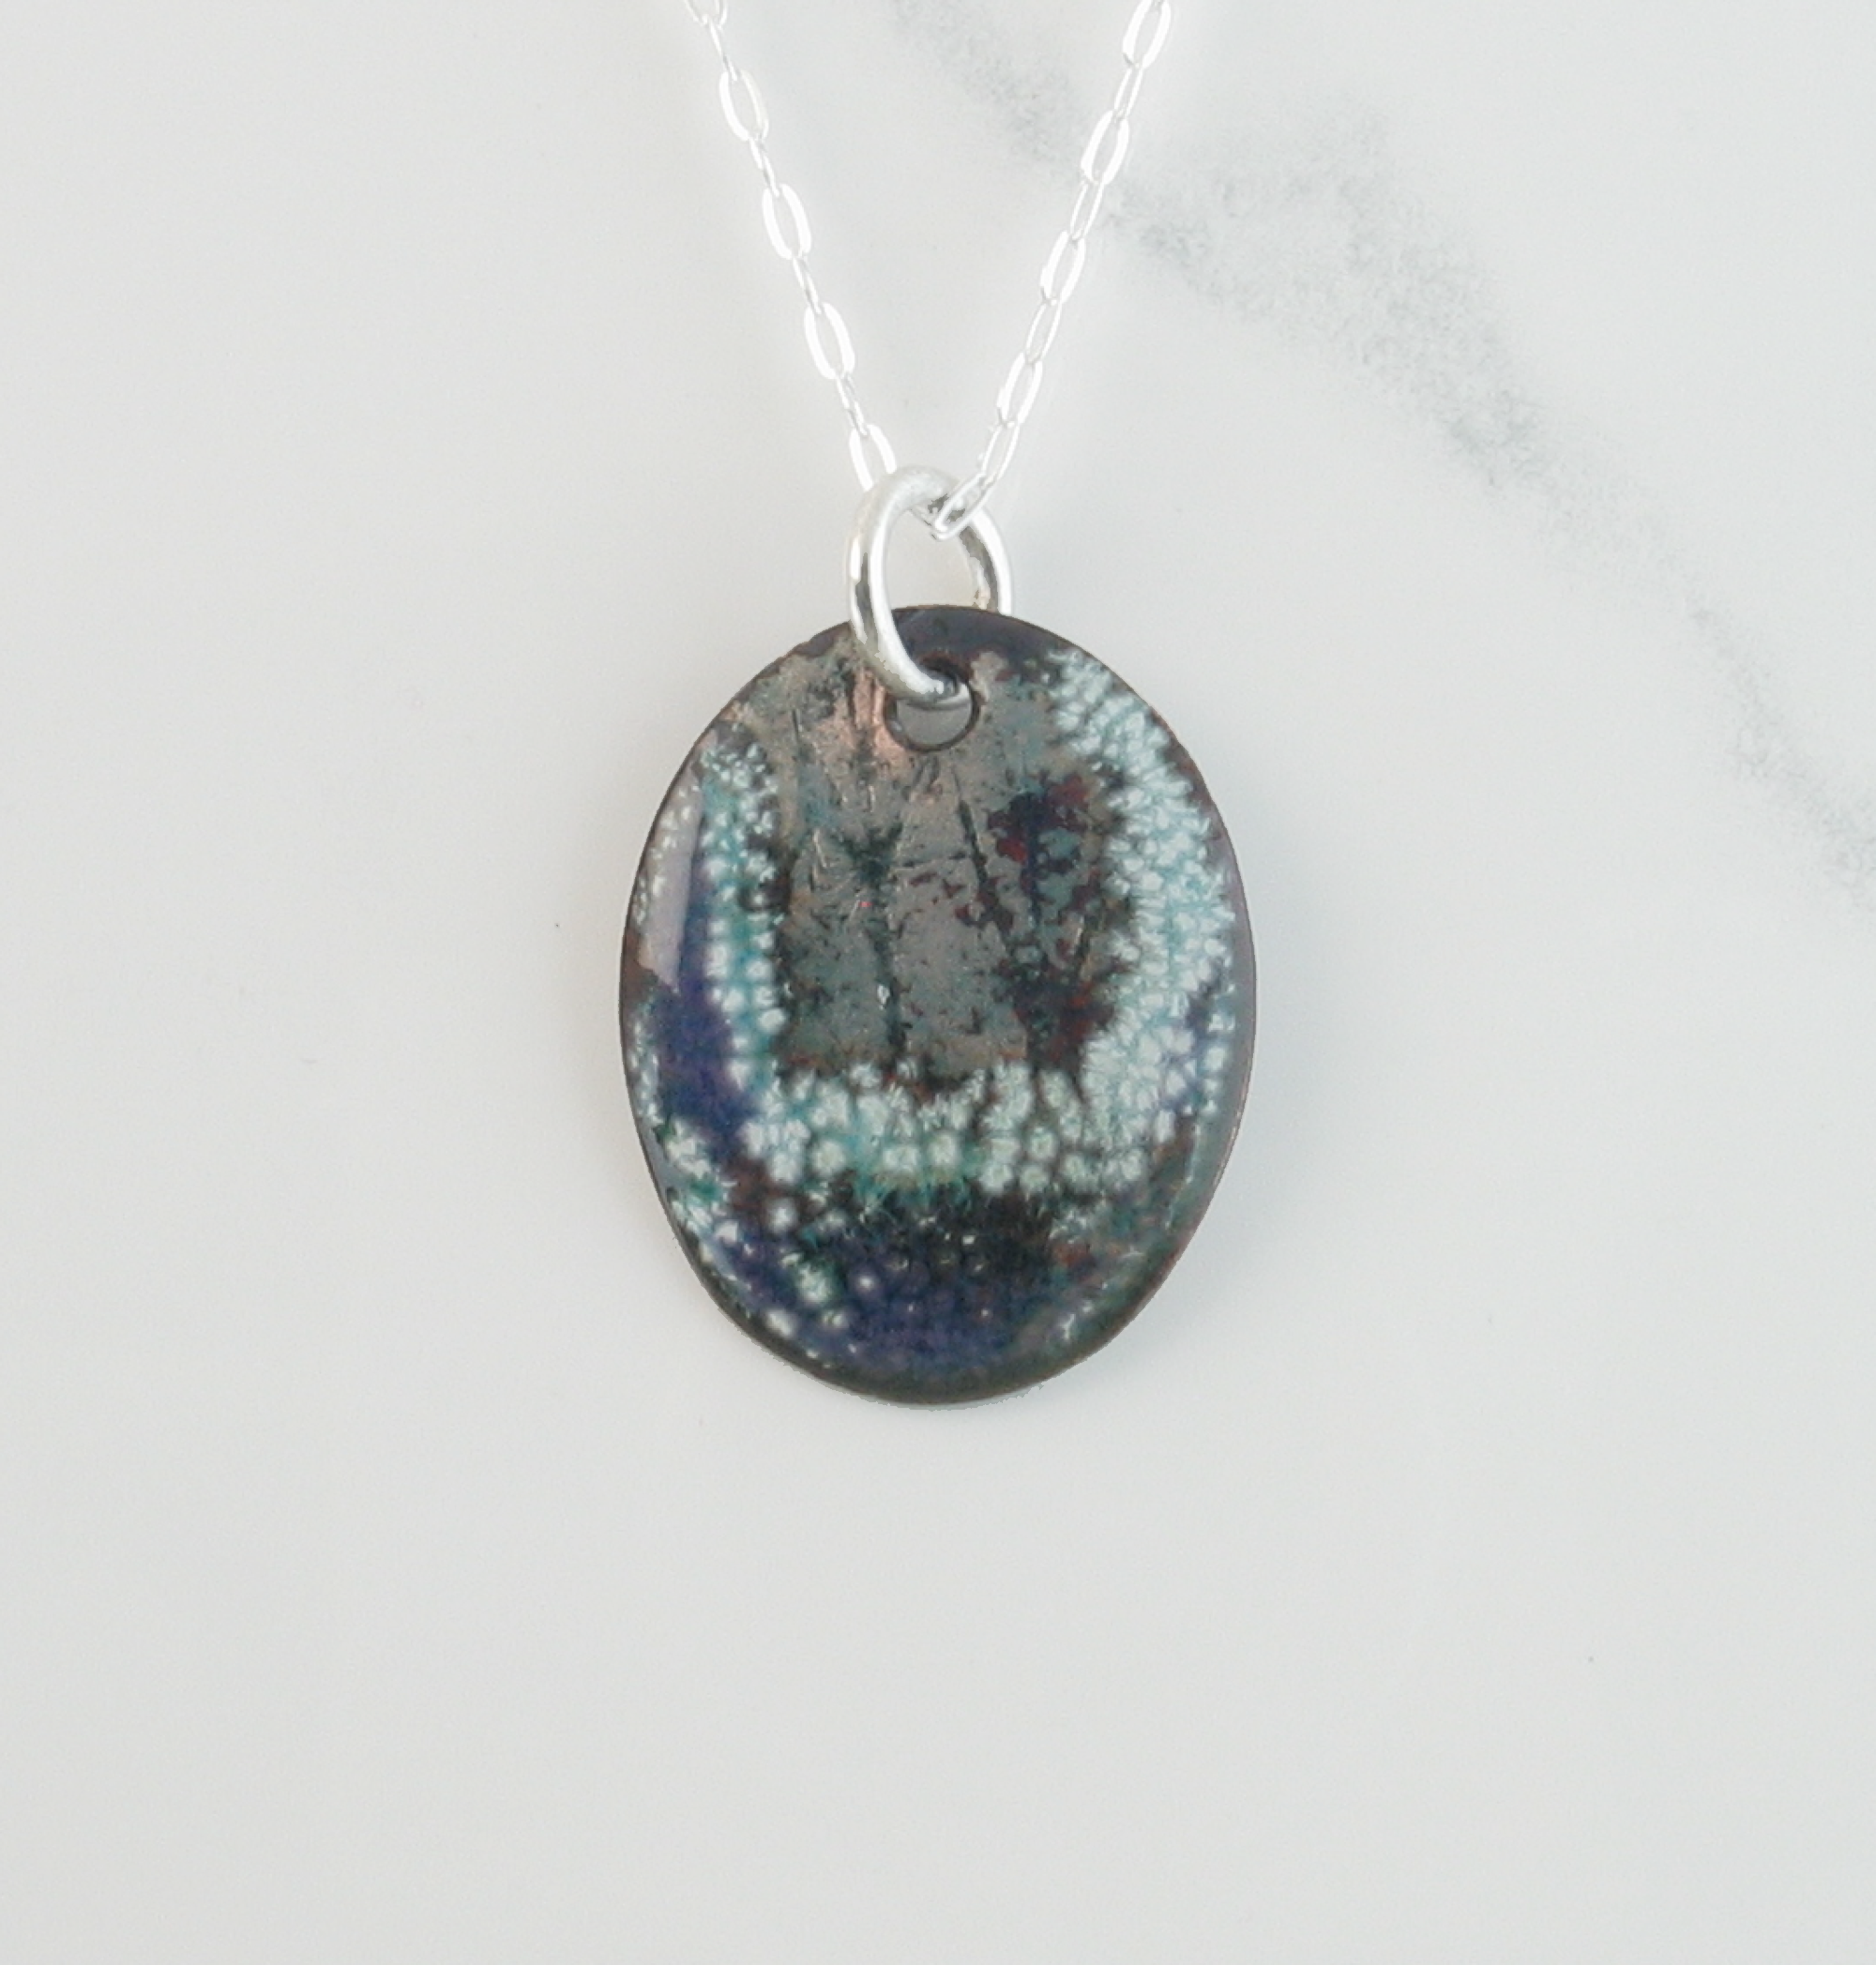 Queen Anne's Lace-Impressed and Hand Painted Enamel Copper Pendant Necklace with 18" 925 Sterling Silver Cable Chain